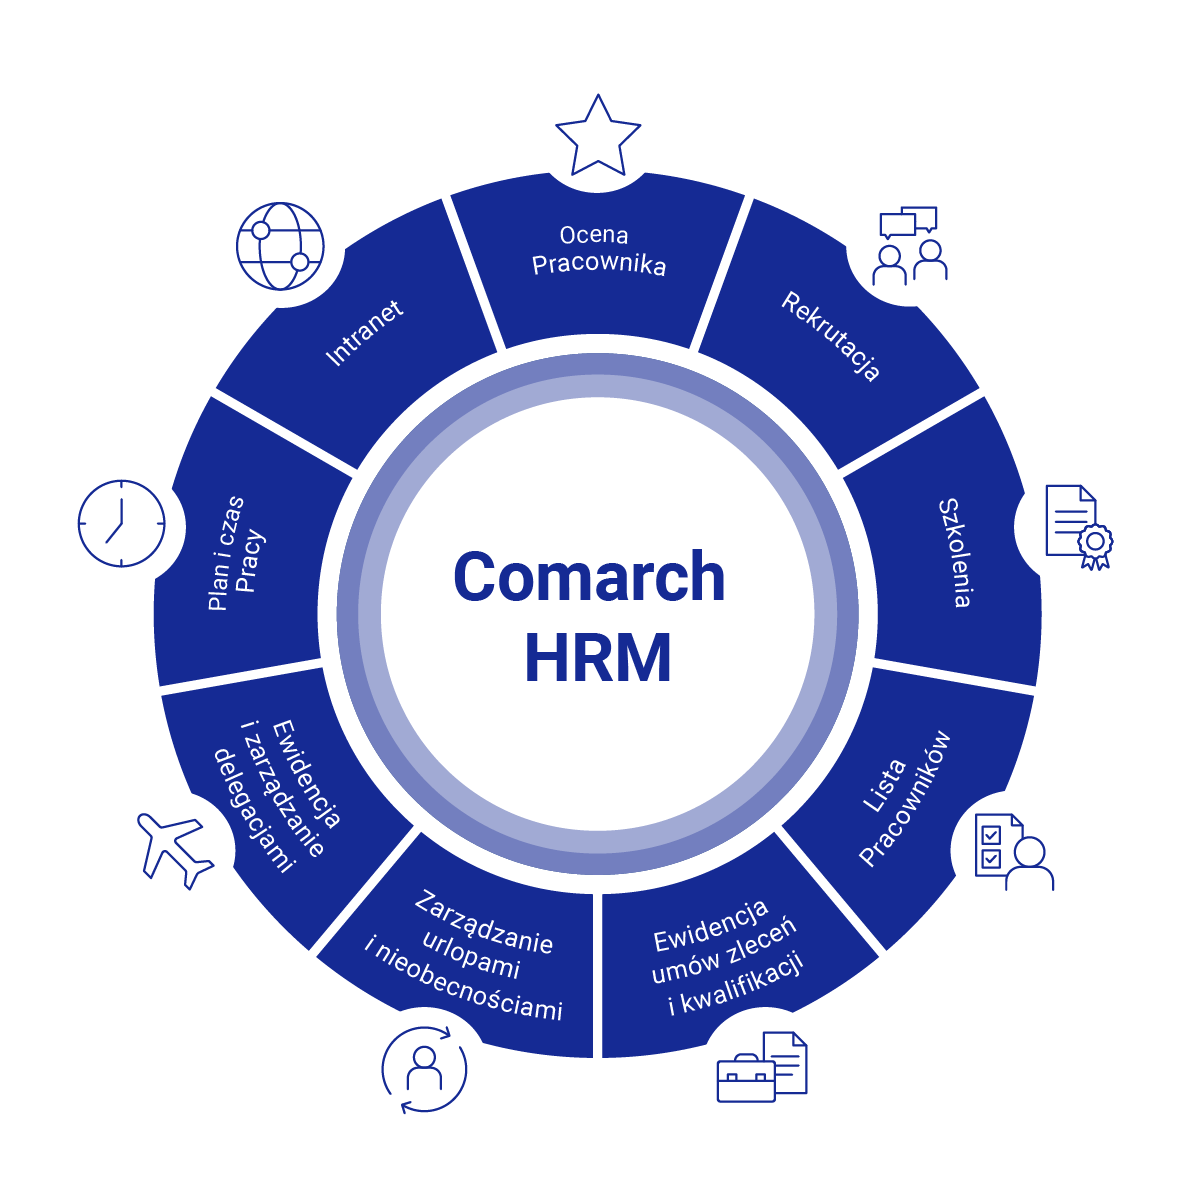 Comarch HRM